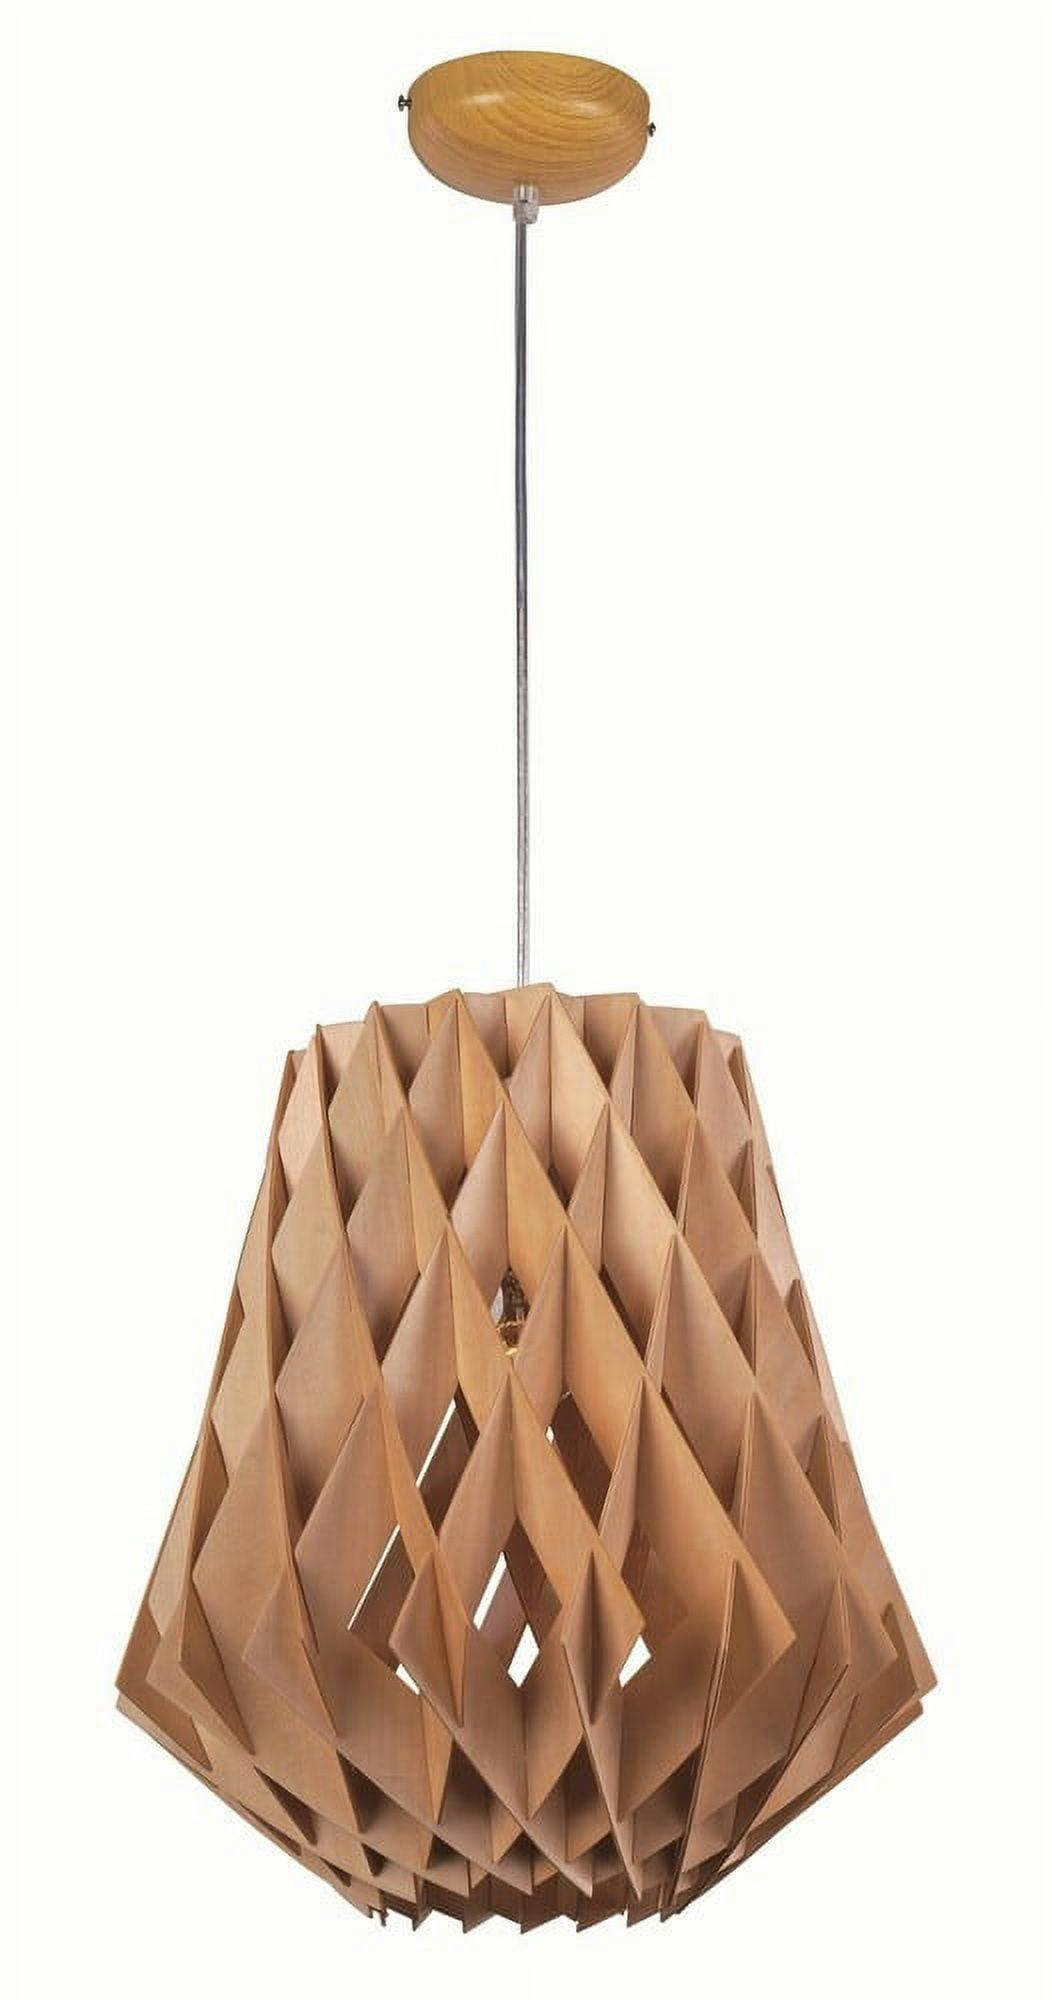 Horgen Uddo Wood Finish 1-Light Pendant with Clear Cord